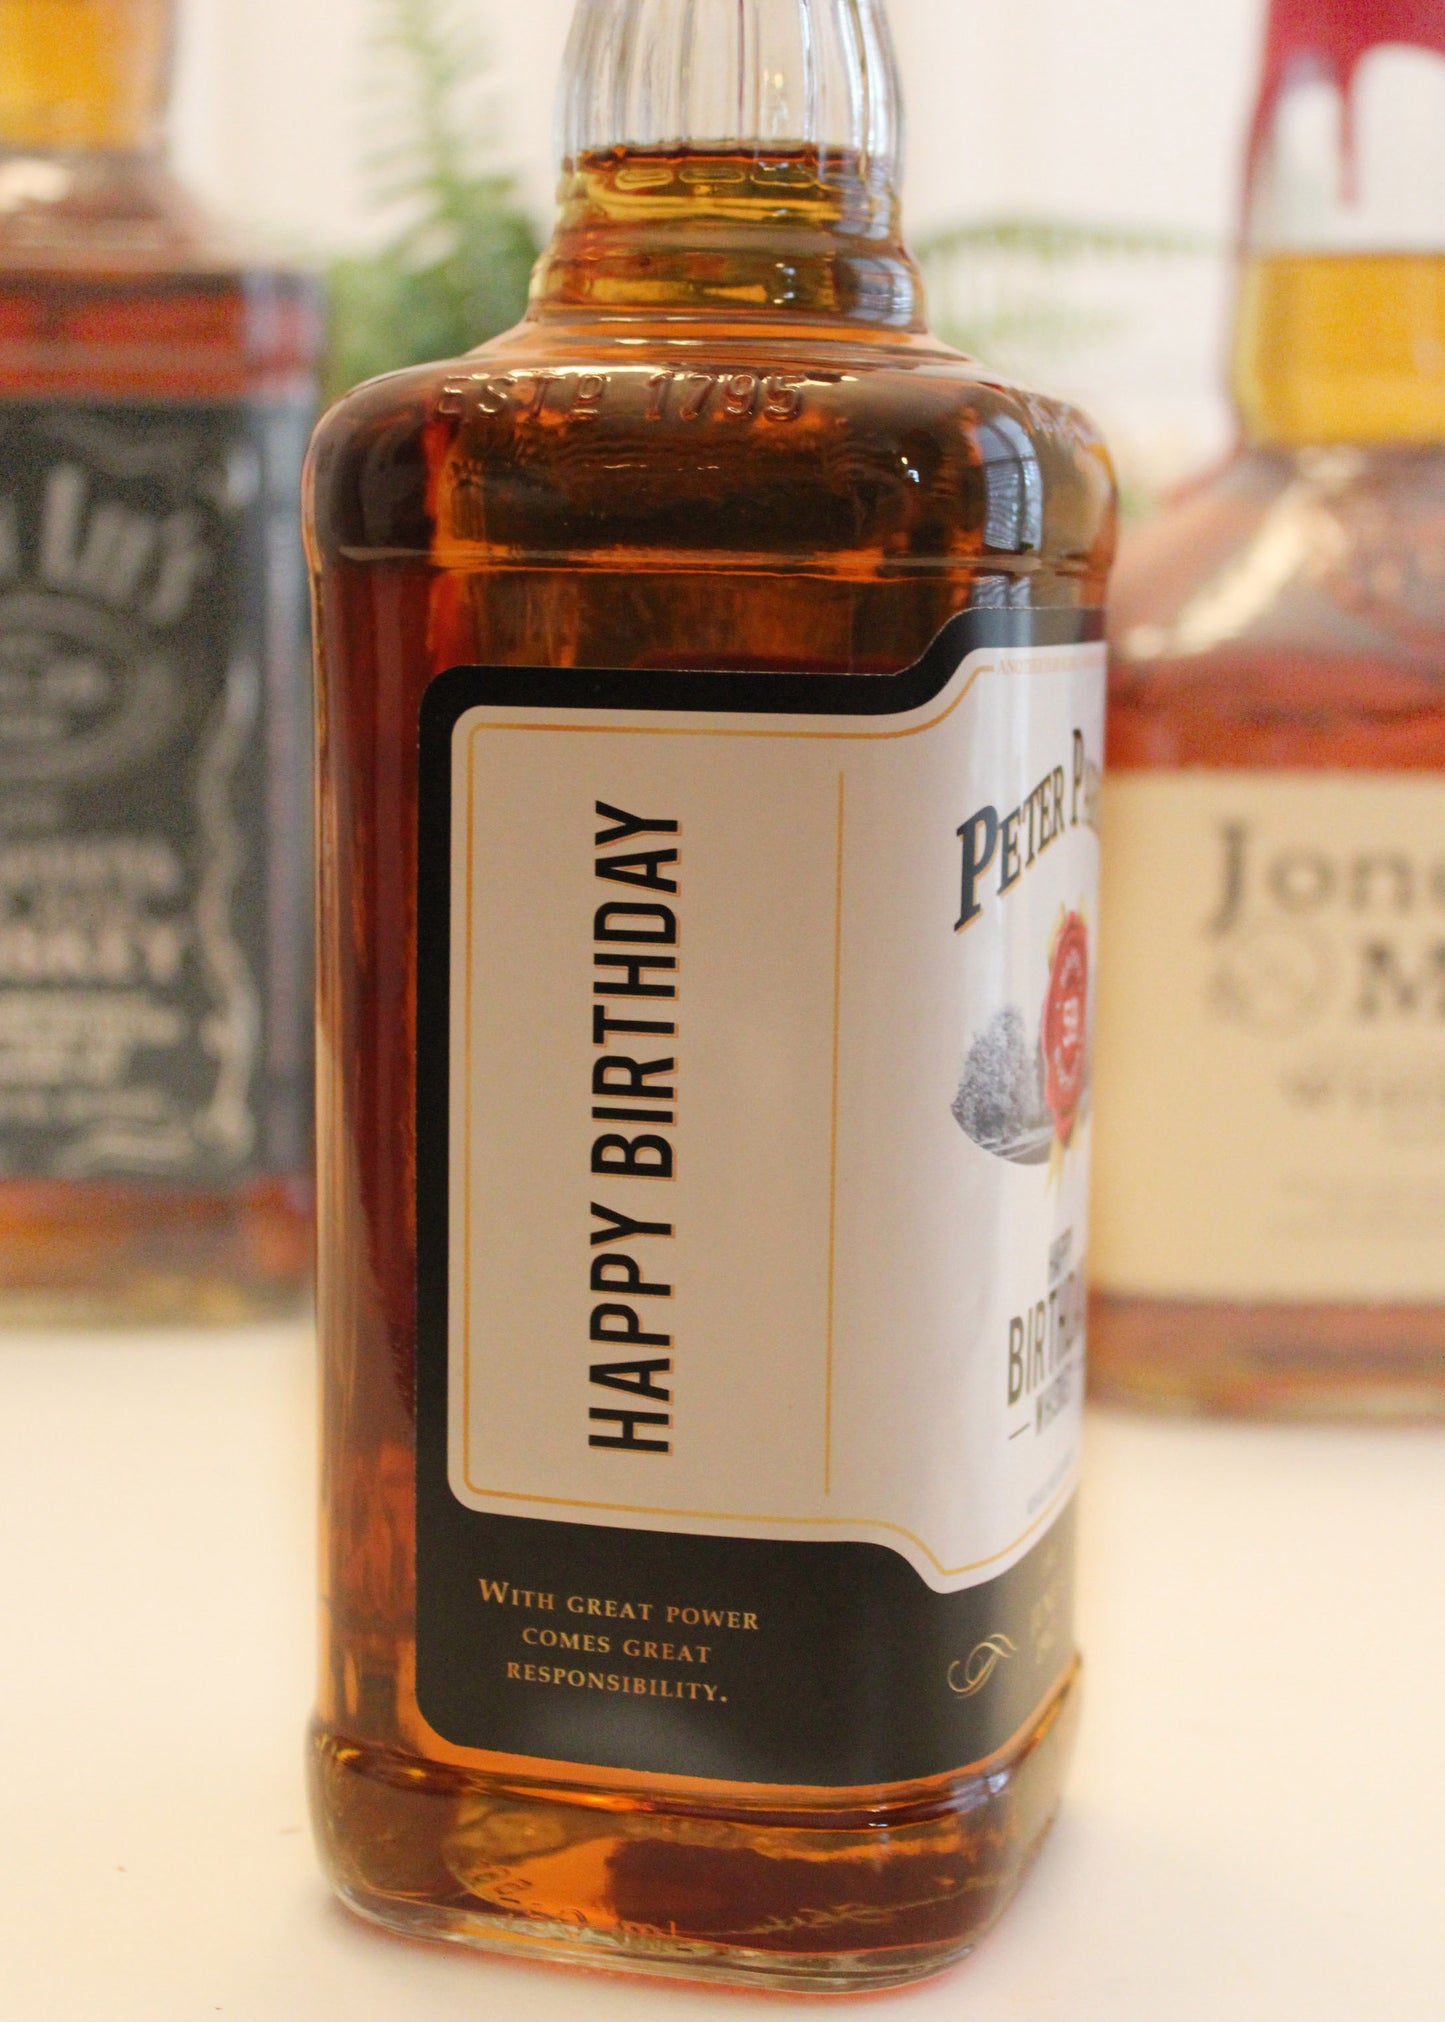 Personalized Label to fit Jim Beam Bottles